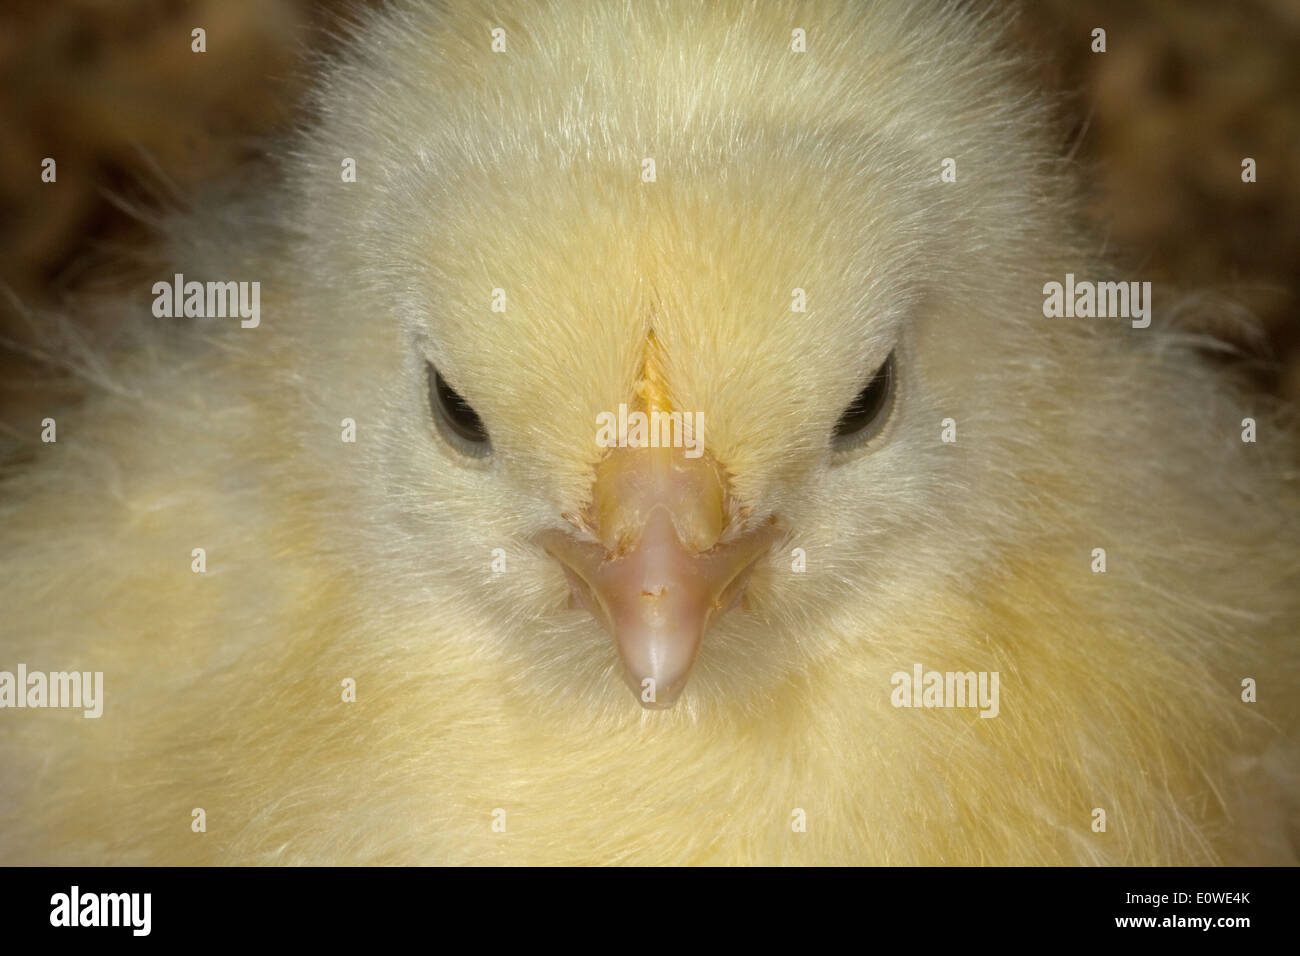 Day old hyline chick Stock Photo